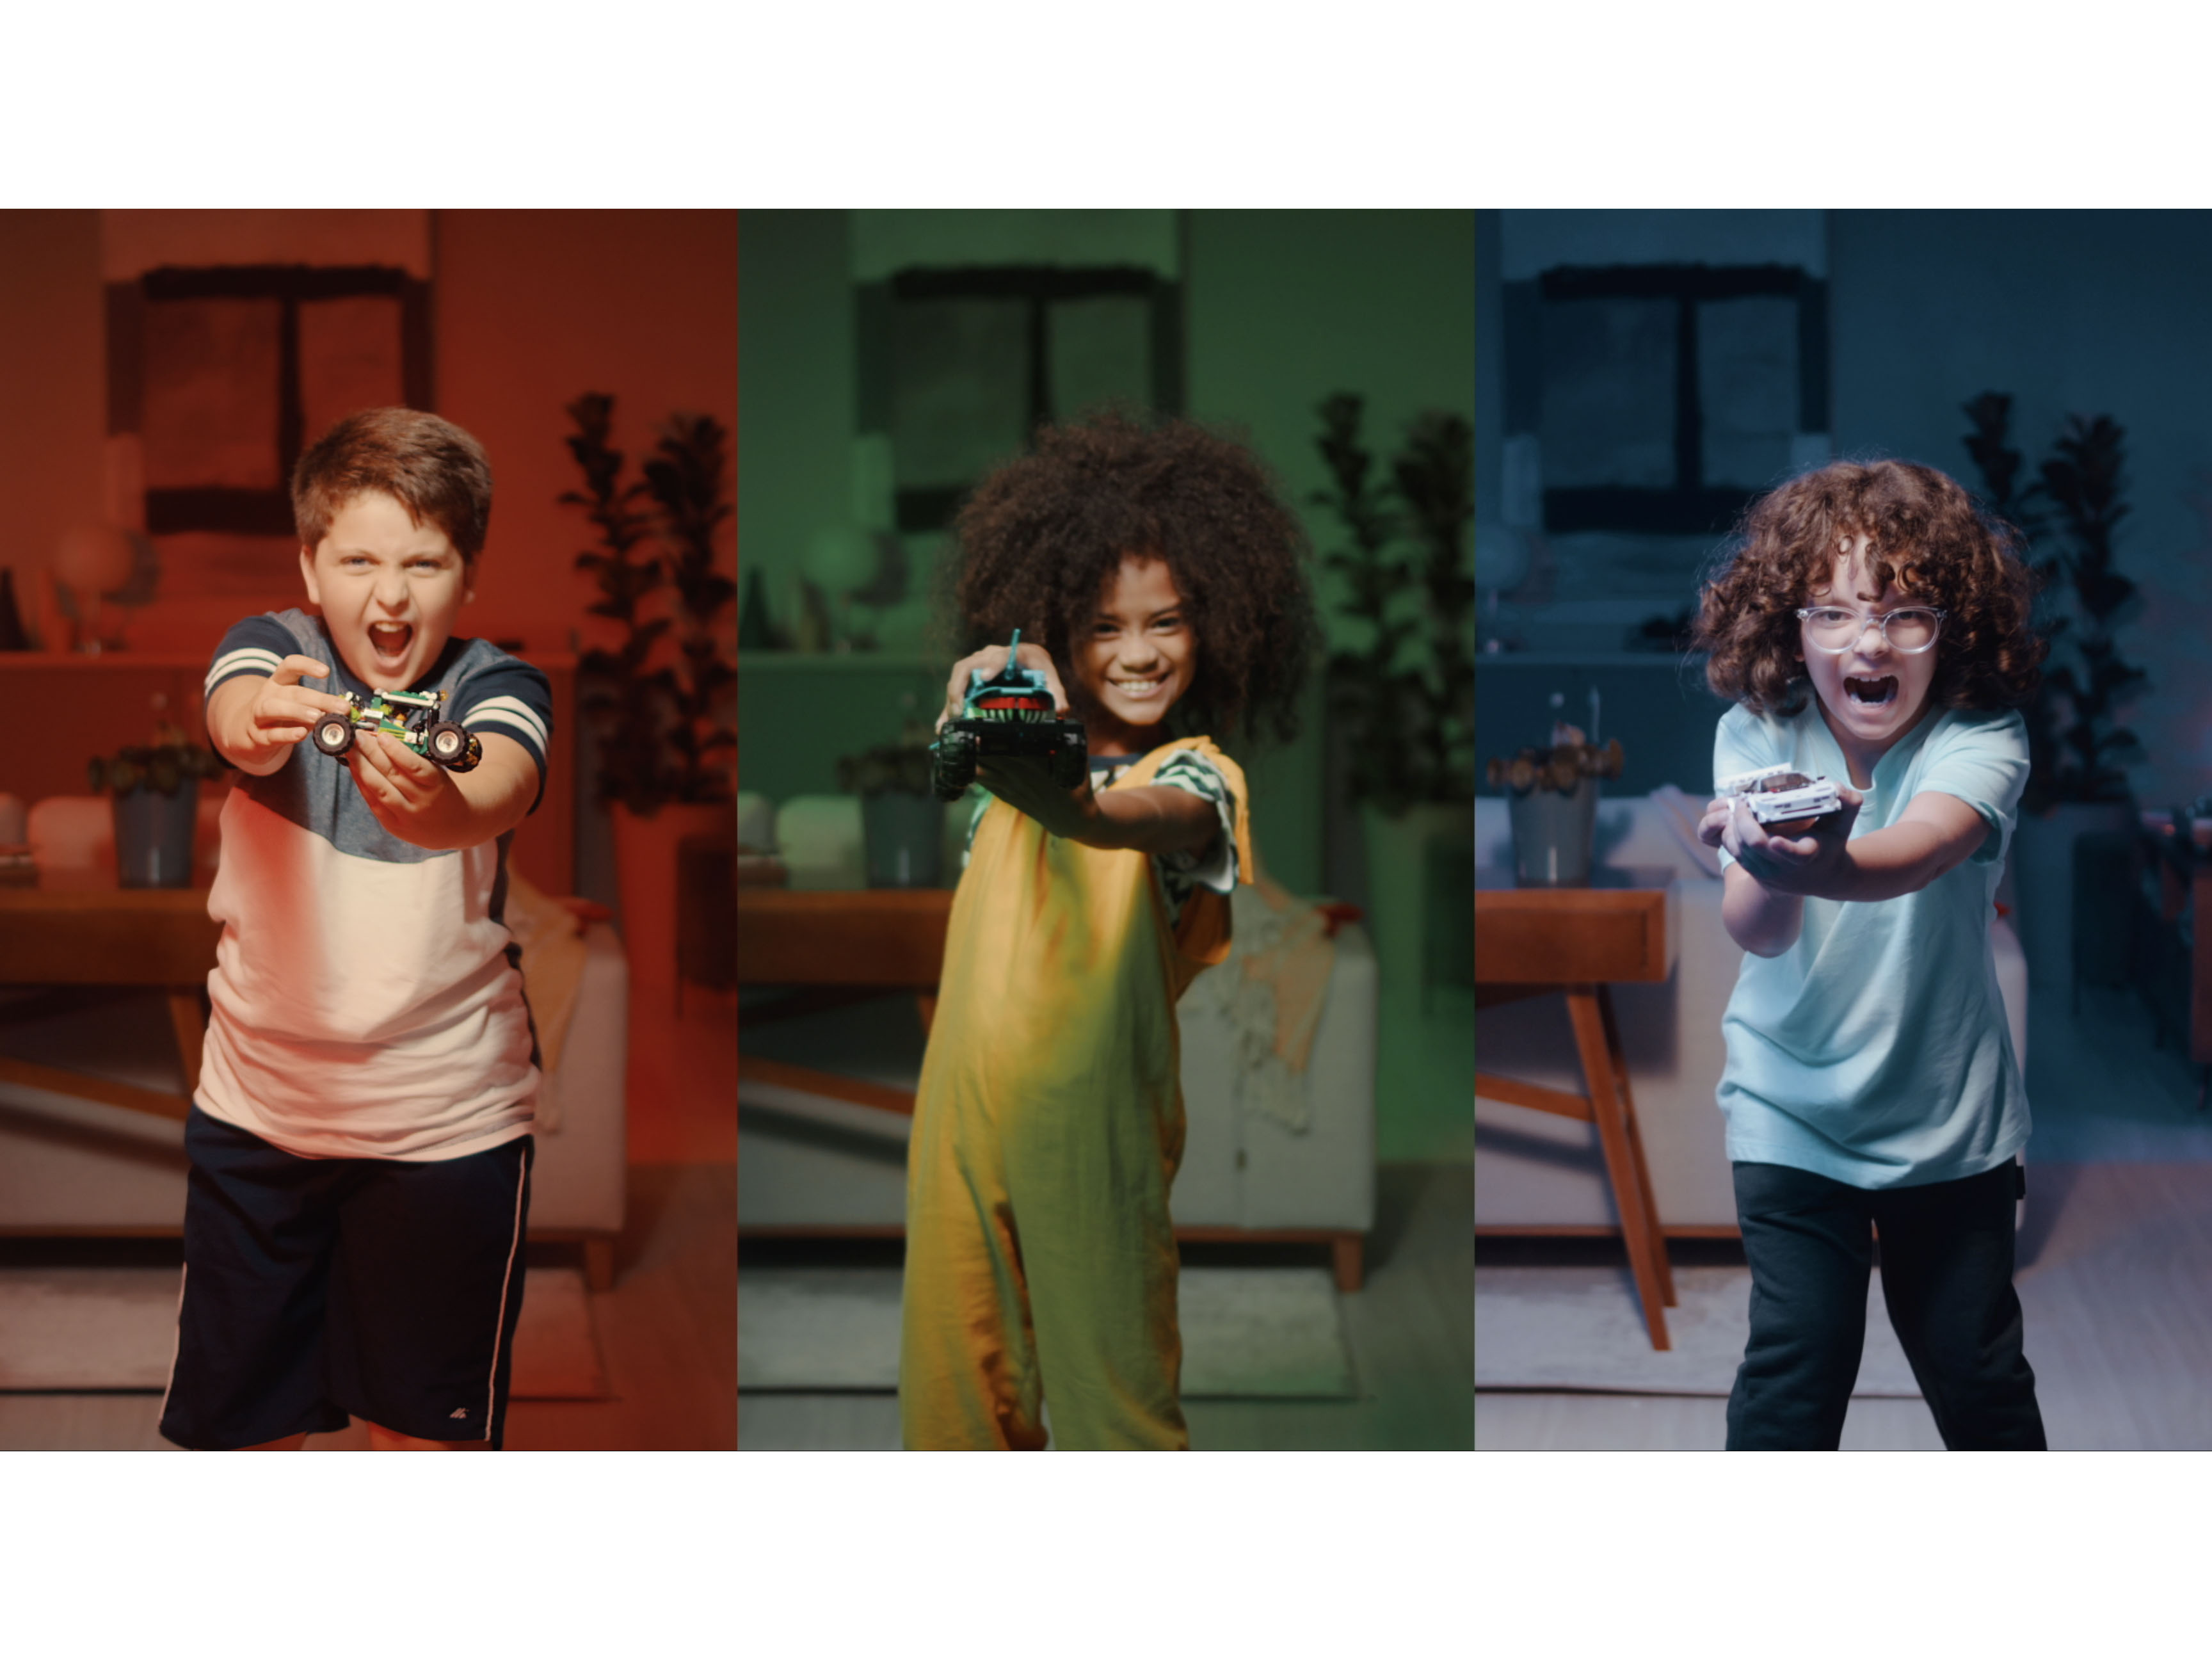 Grey Dubai & Grey Singapore ‘Brick the Rules’ in new campaign for LEGO Middle East & Africa 